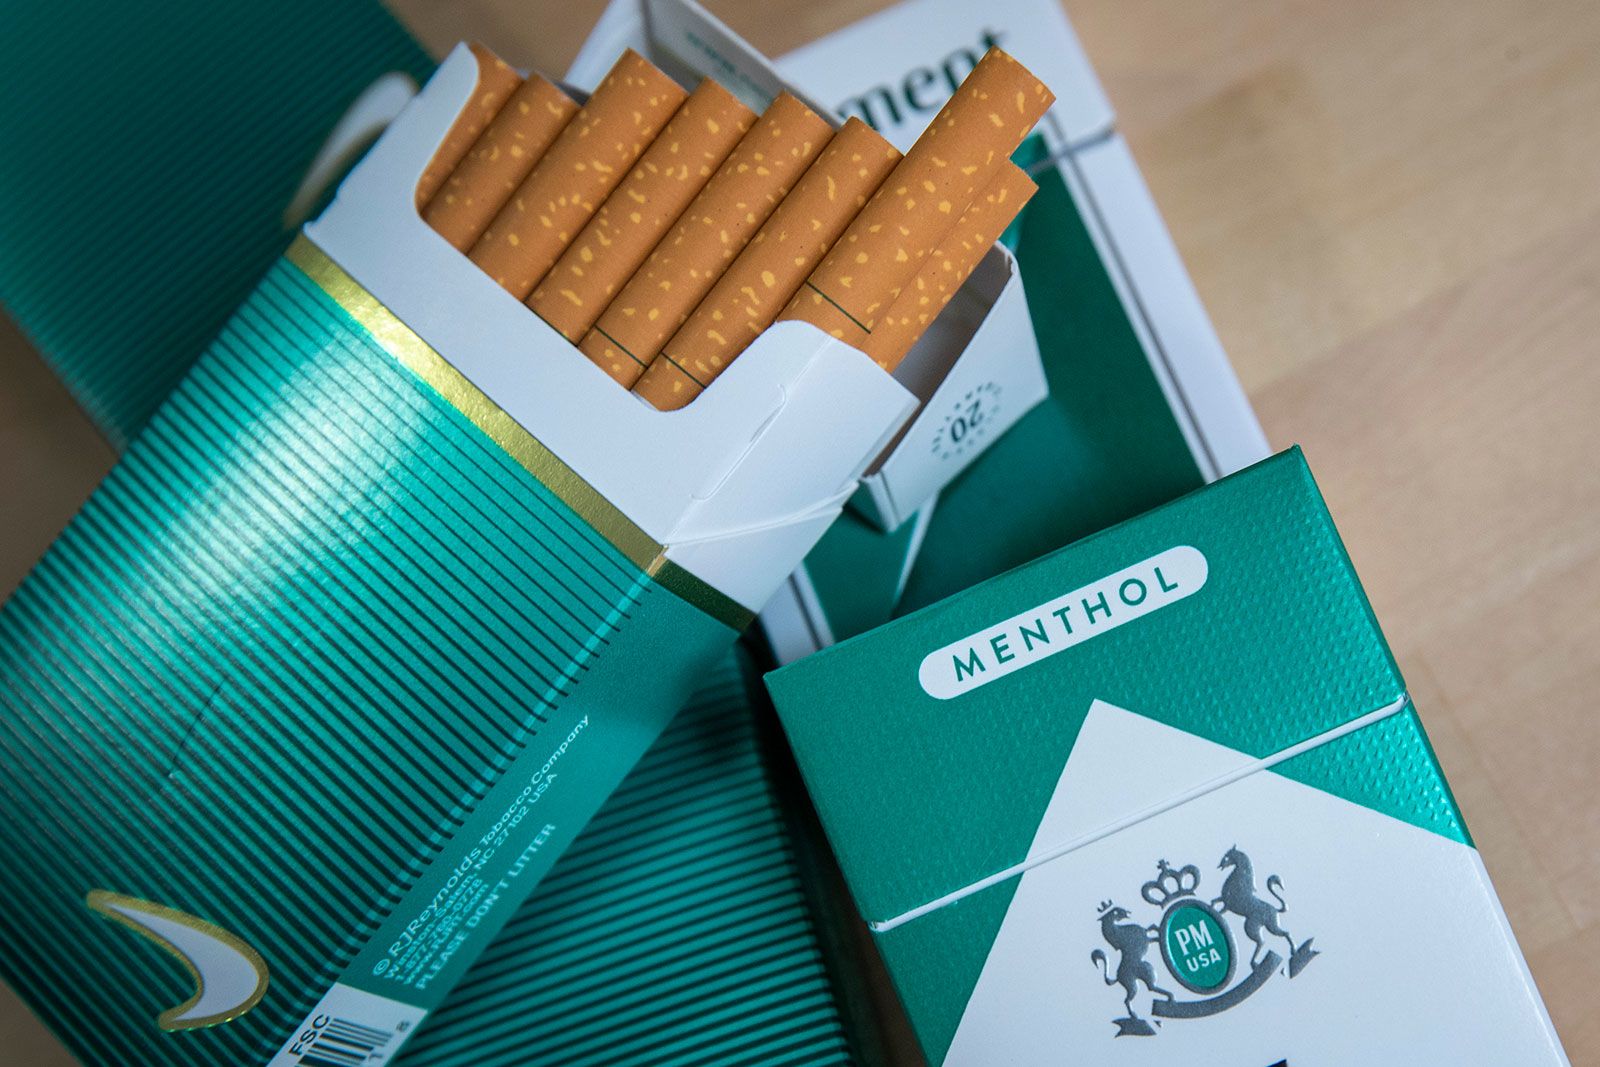 With menthol cigarette ban still uncertain, American Lung Association calls  for White House to act 'swiftly' to save lives